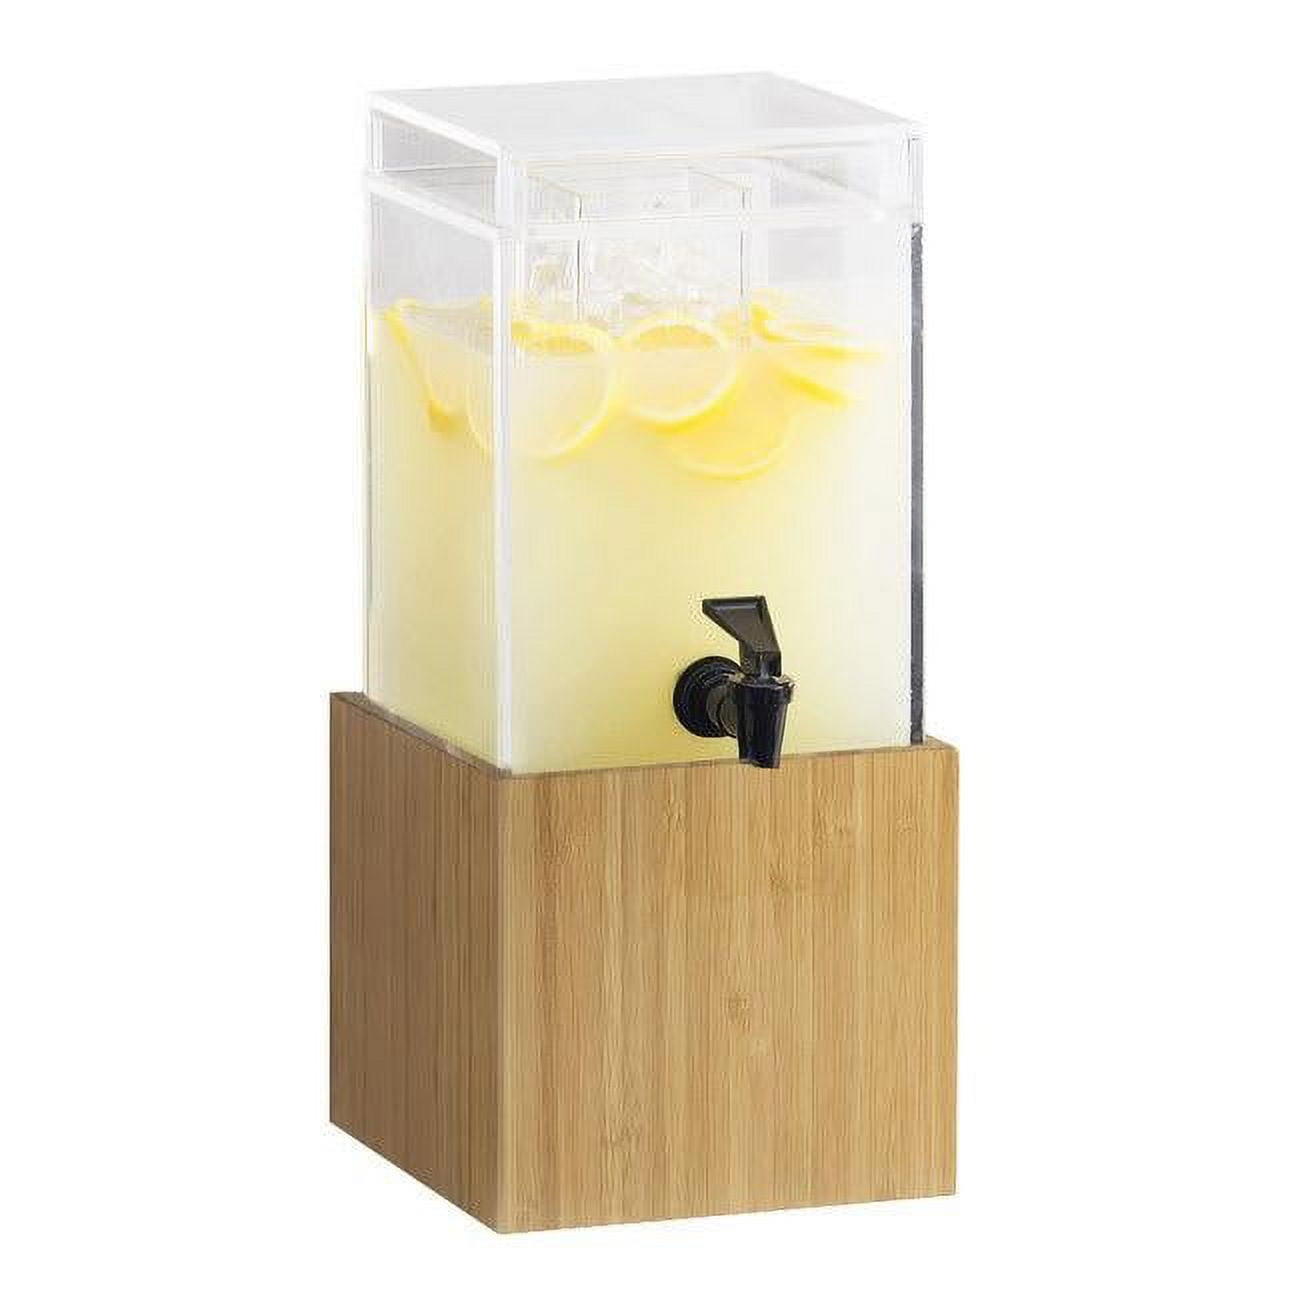 Picture of Cal Mil 1527-1-60 1.5 gal Bamboo Beverage Dispenser - 8.125 x 9.75 x 17.75 in.